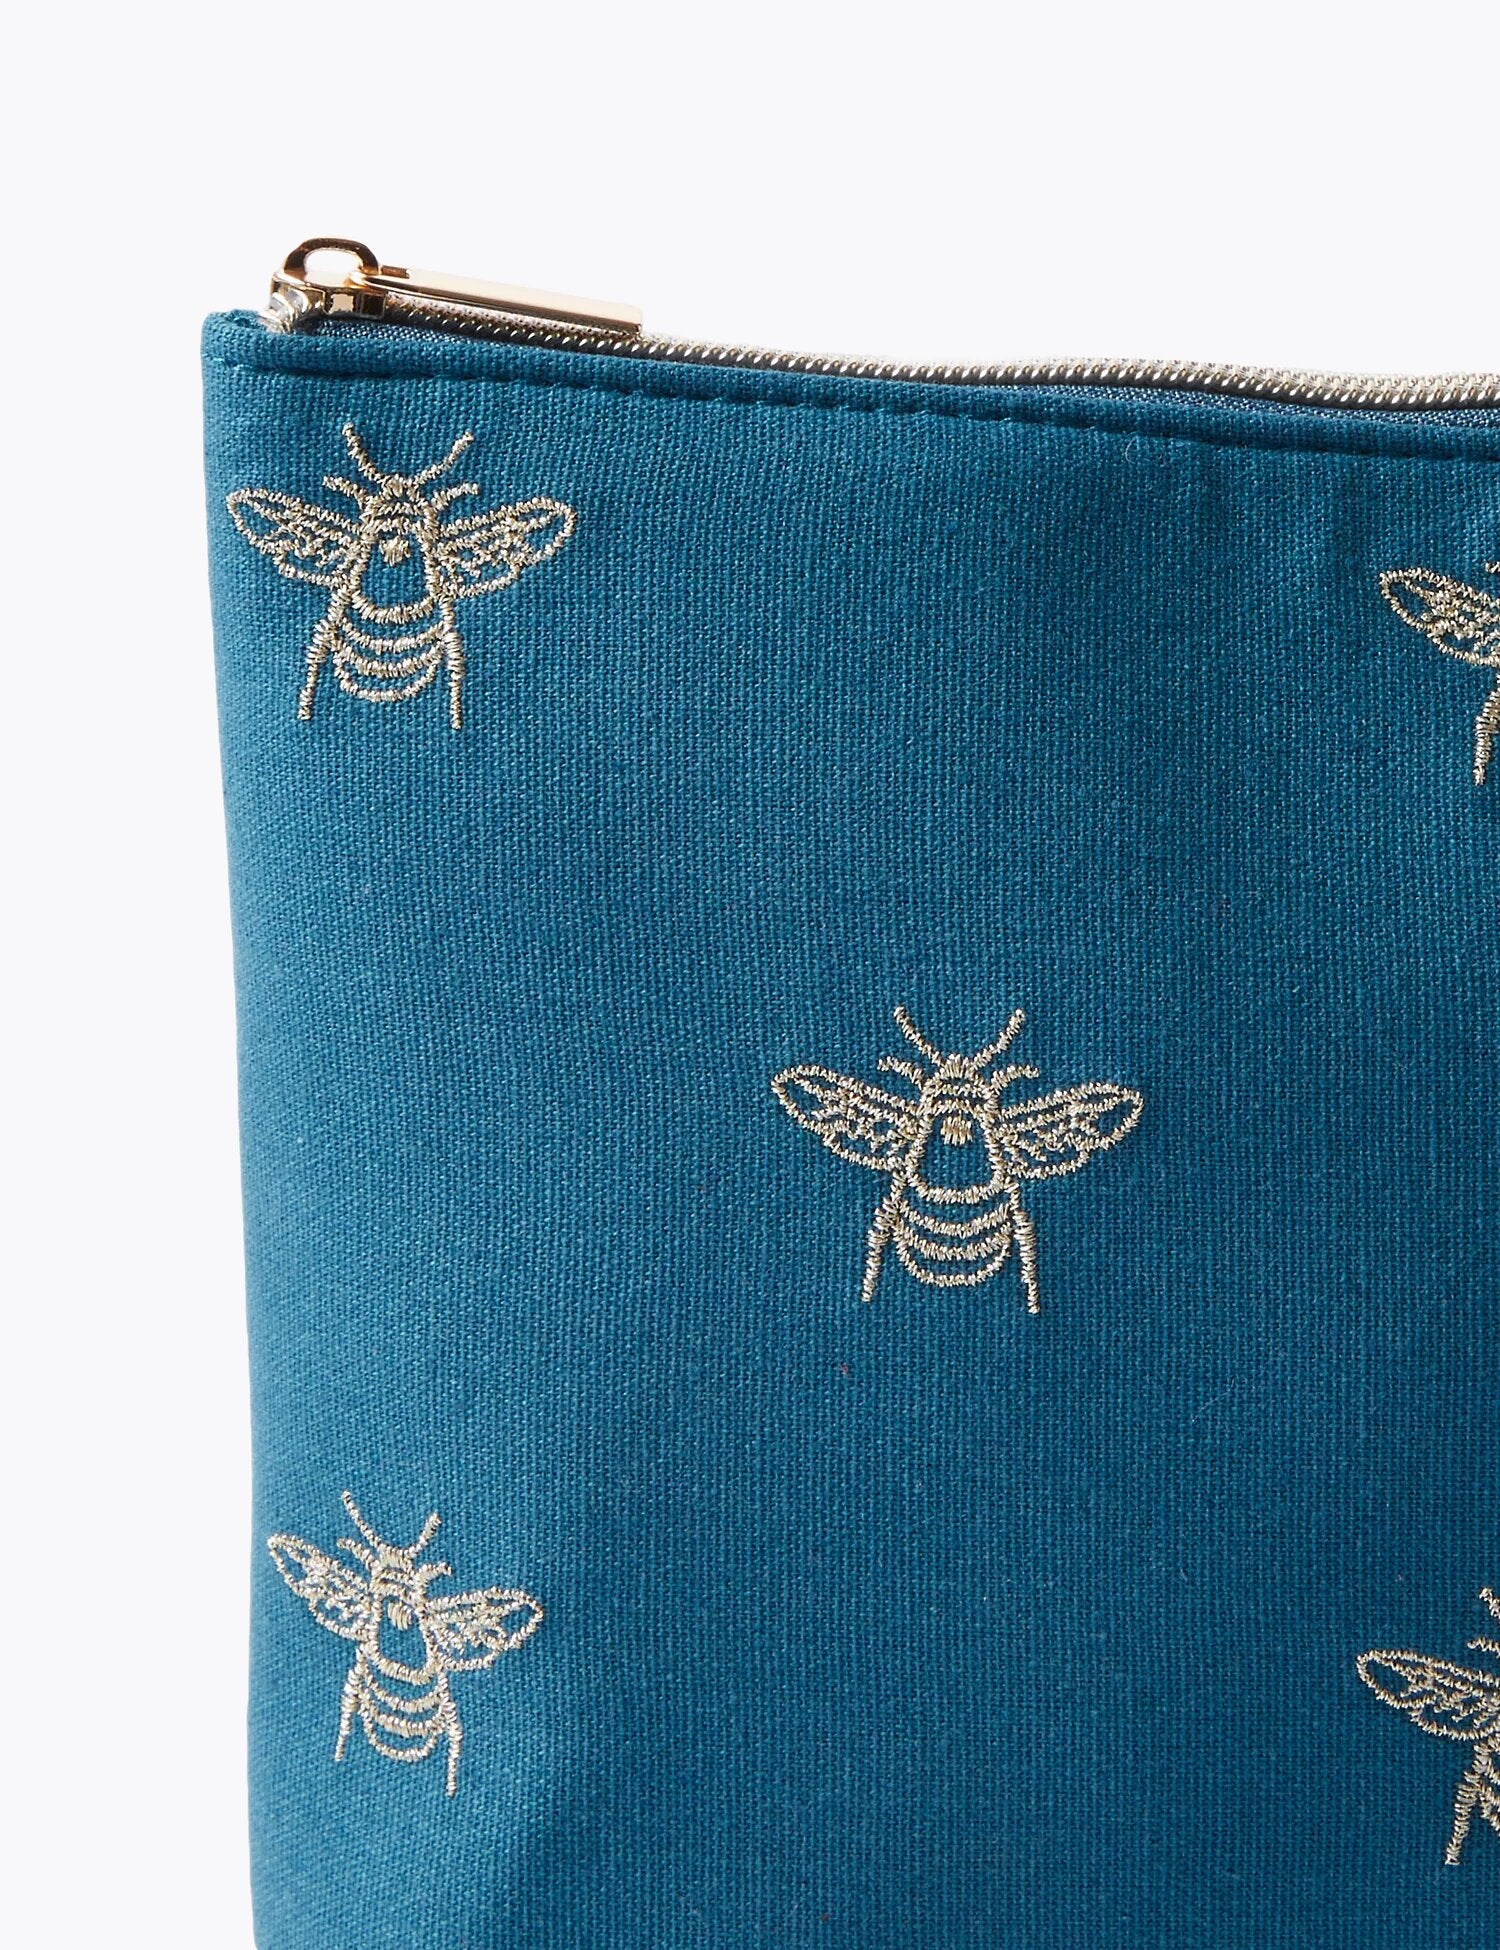 Embroidered Bee Make-Up Pouch